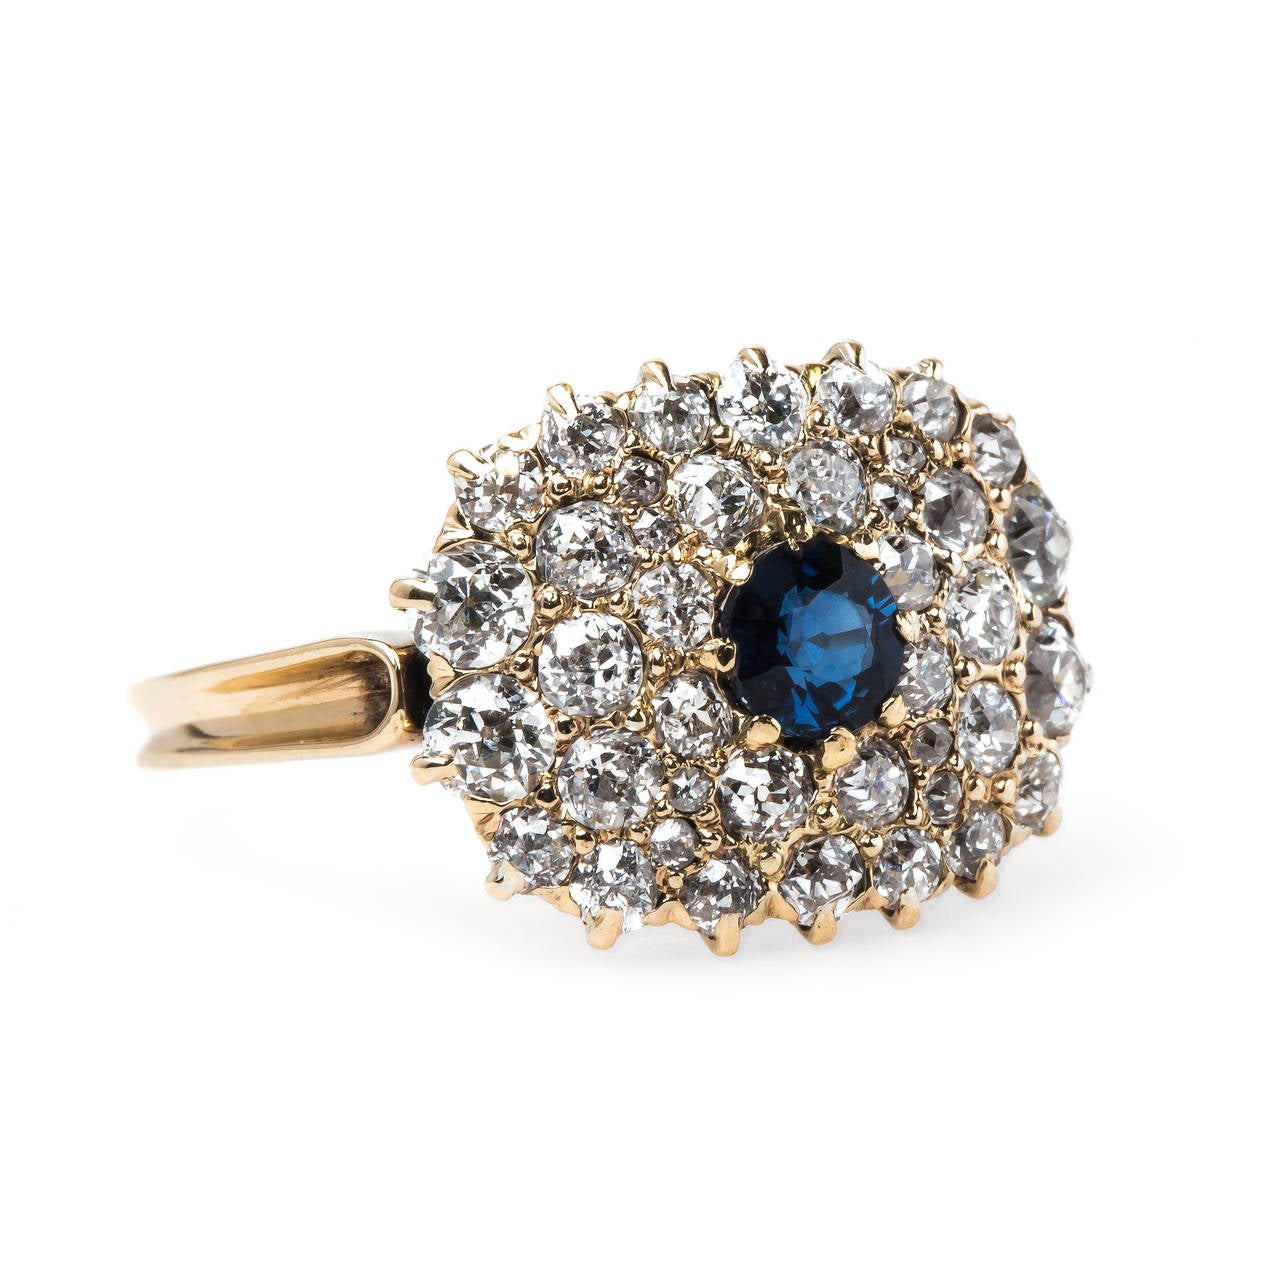 Bunker Hill is a delightful authentic Victorian era (circa 1895) 14k yellow gold sapphire and diamond ring centering a single round natural deep blue sapphire totaling approximately 0.40ct and framed by a cushion shaped cluster of forty-one Old Mine